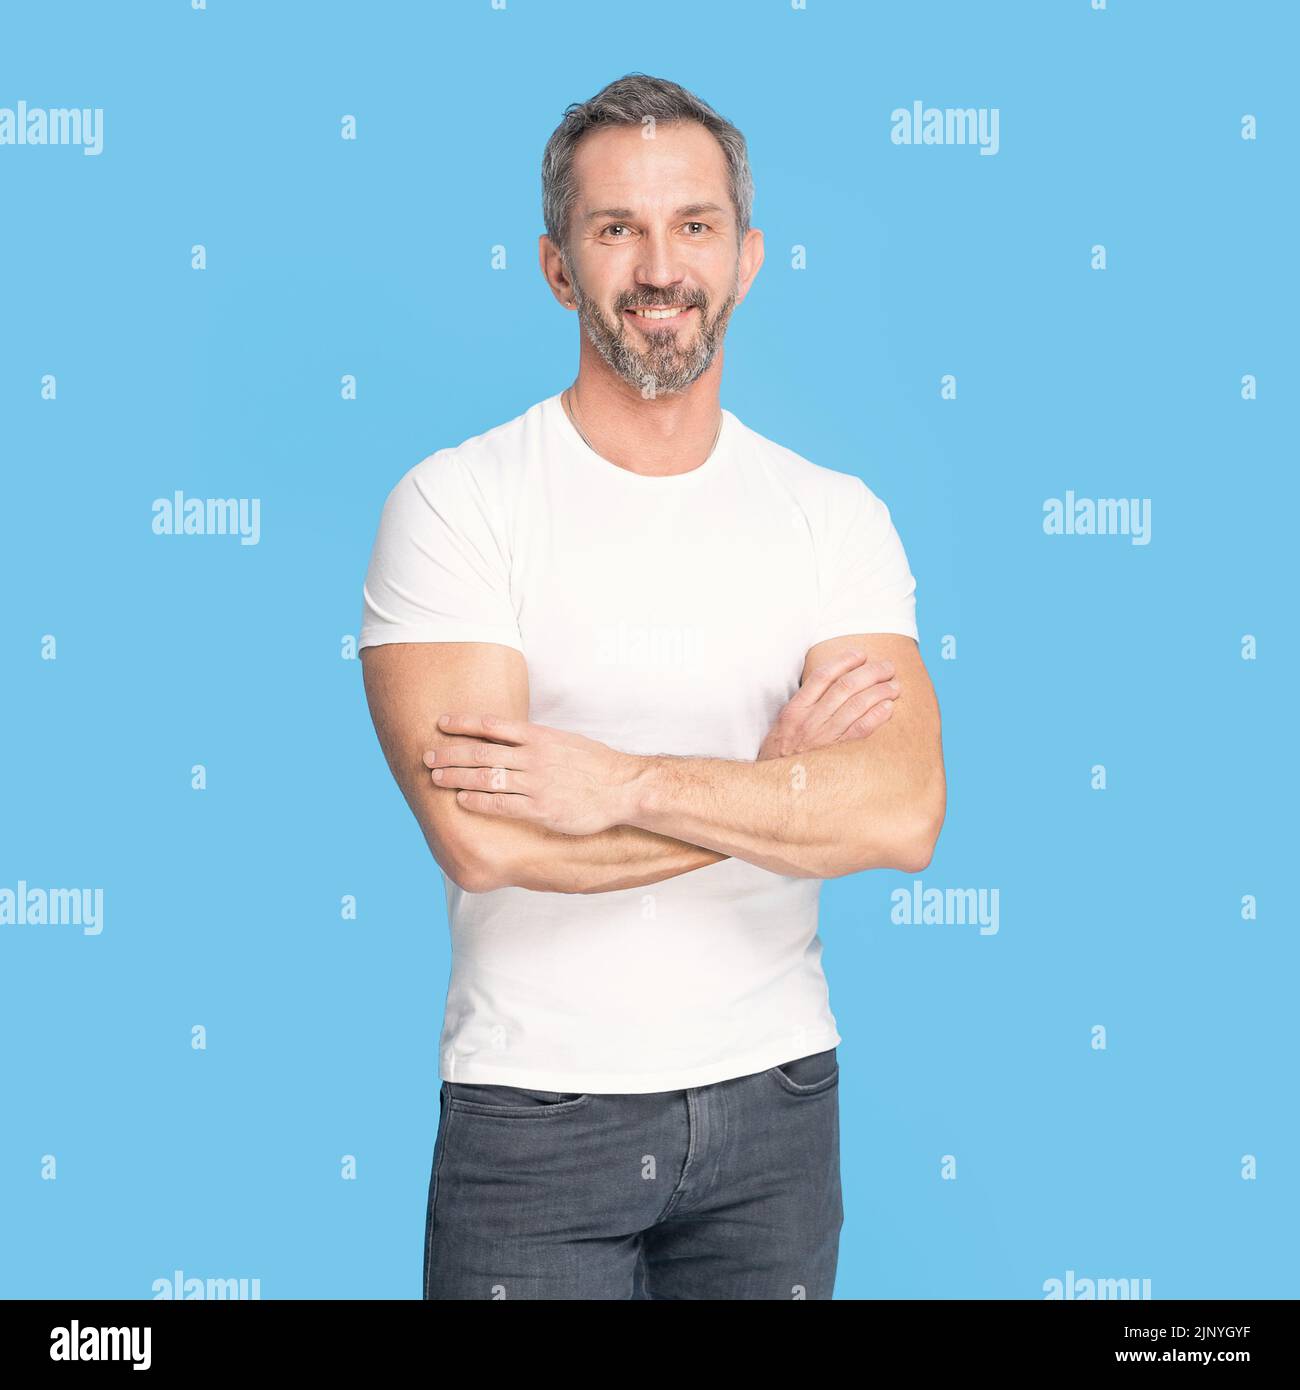 Handsome middle aged grey haired man standing with arms folded happy looking at camera wearing white t-shirt and jeans isolated on blue background. Mature fit man, healthy lifestyle concept. Stock Photo